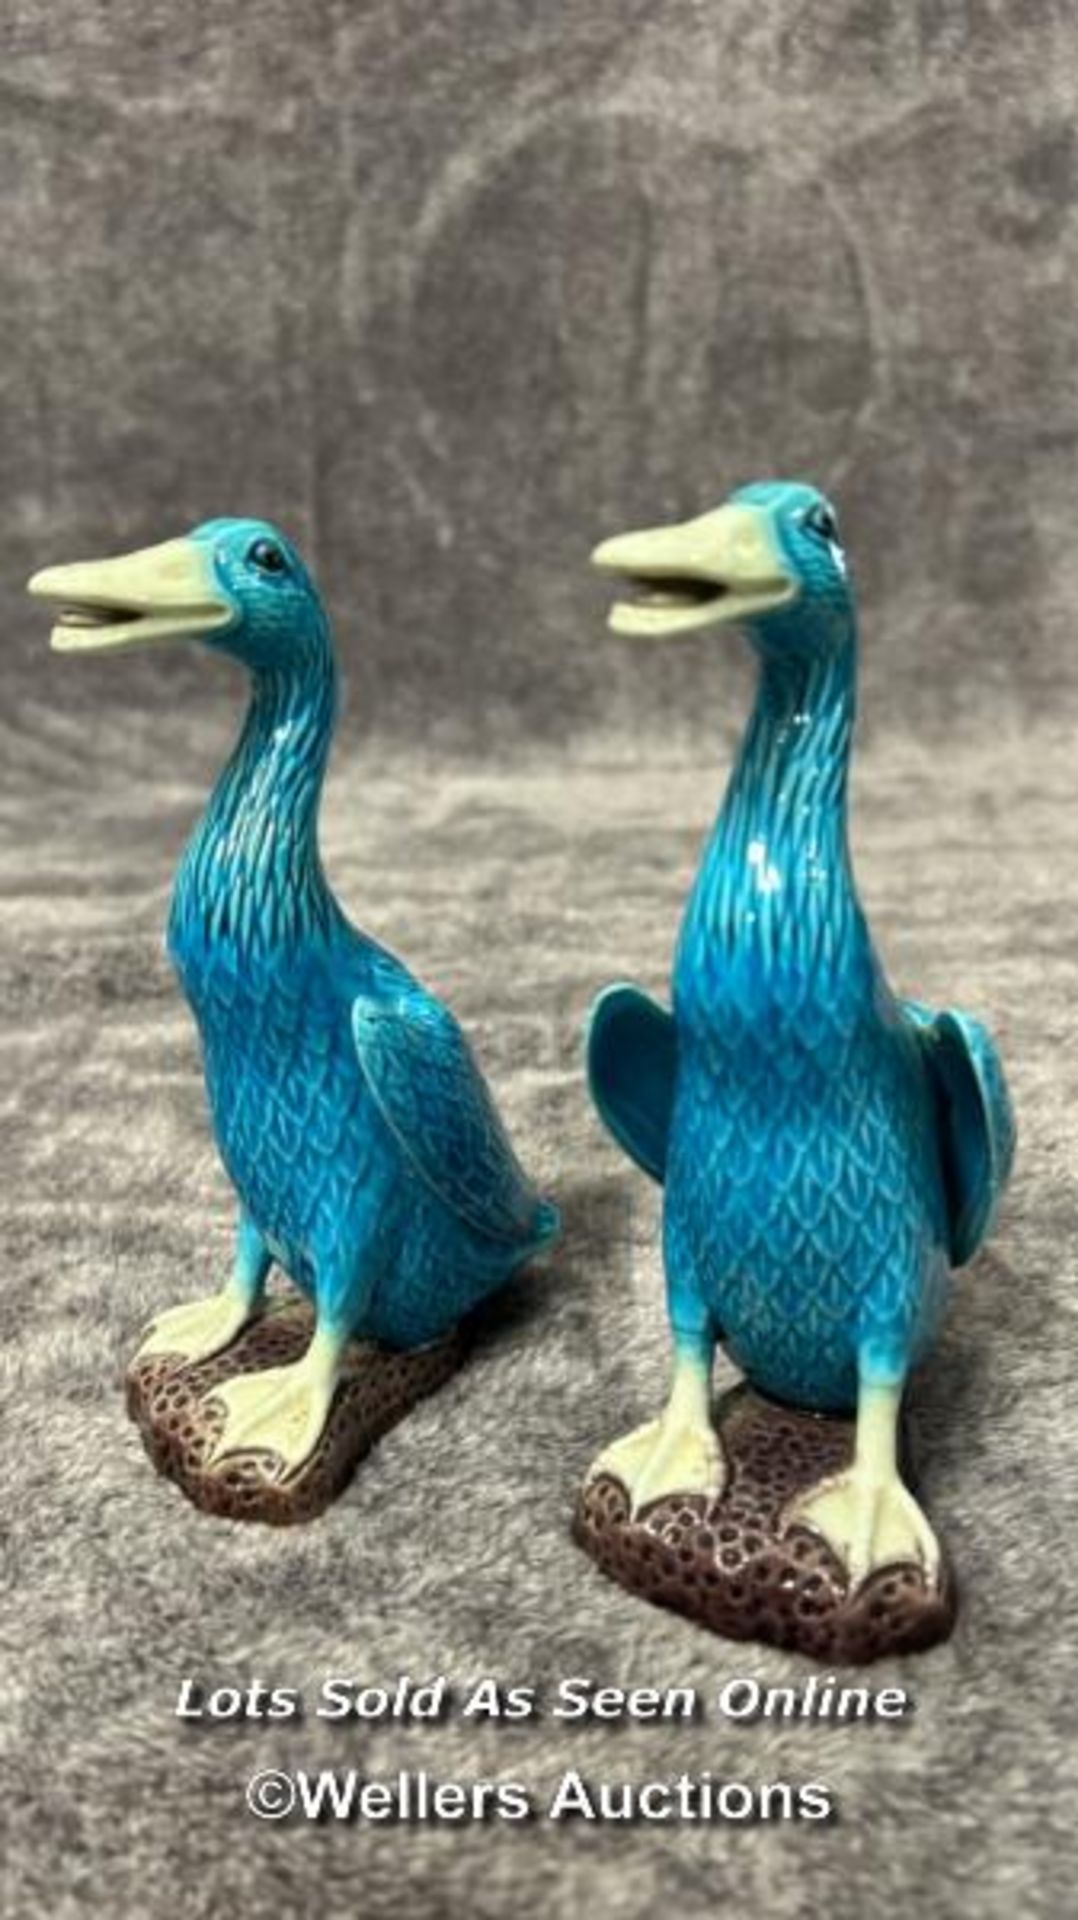 Set of six Chinese turquoise glazed porcelain duck figures, the tallest 29cm high / AN6 - Image 14 of 17